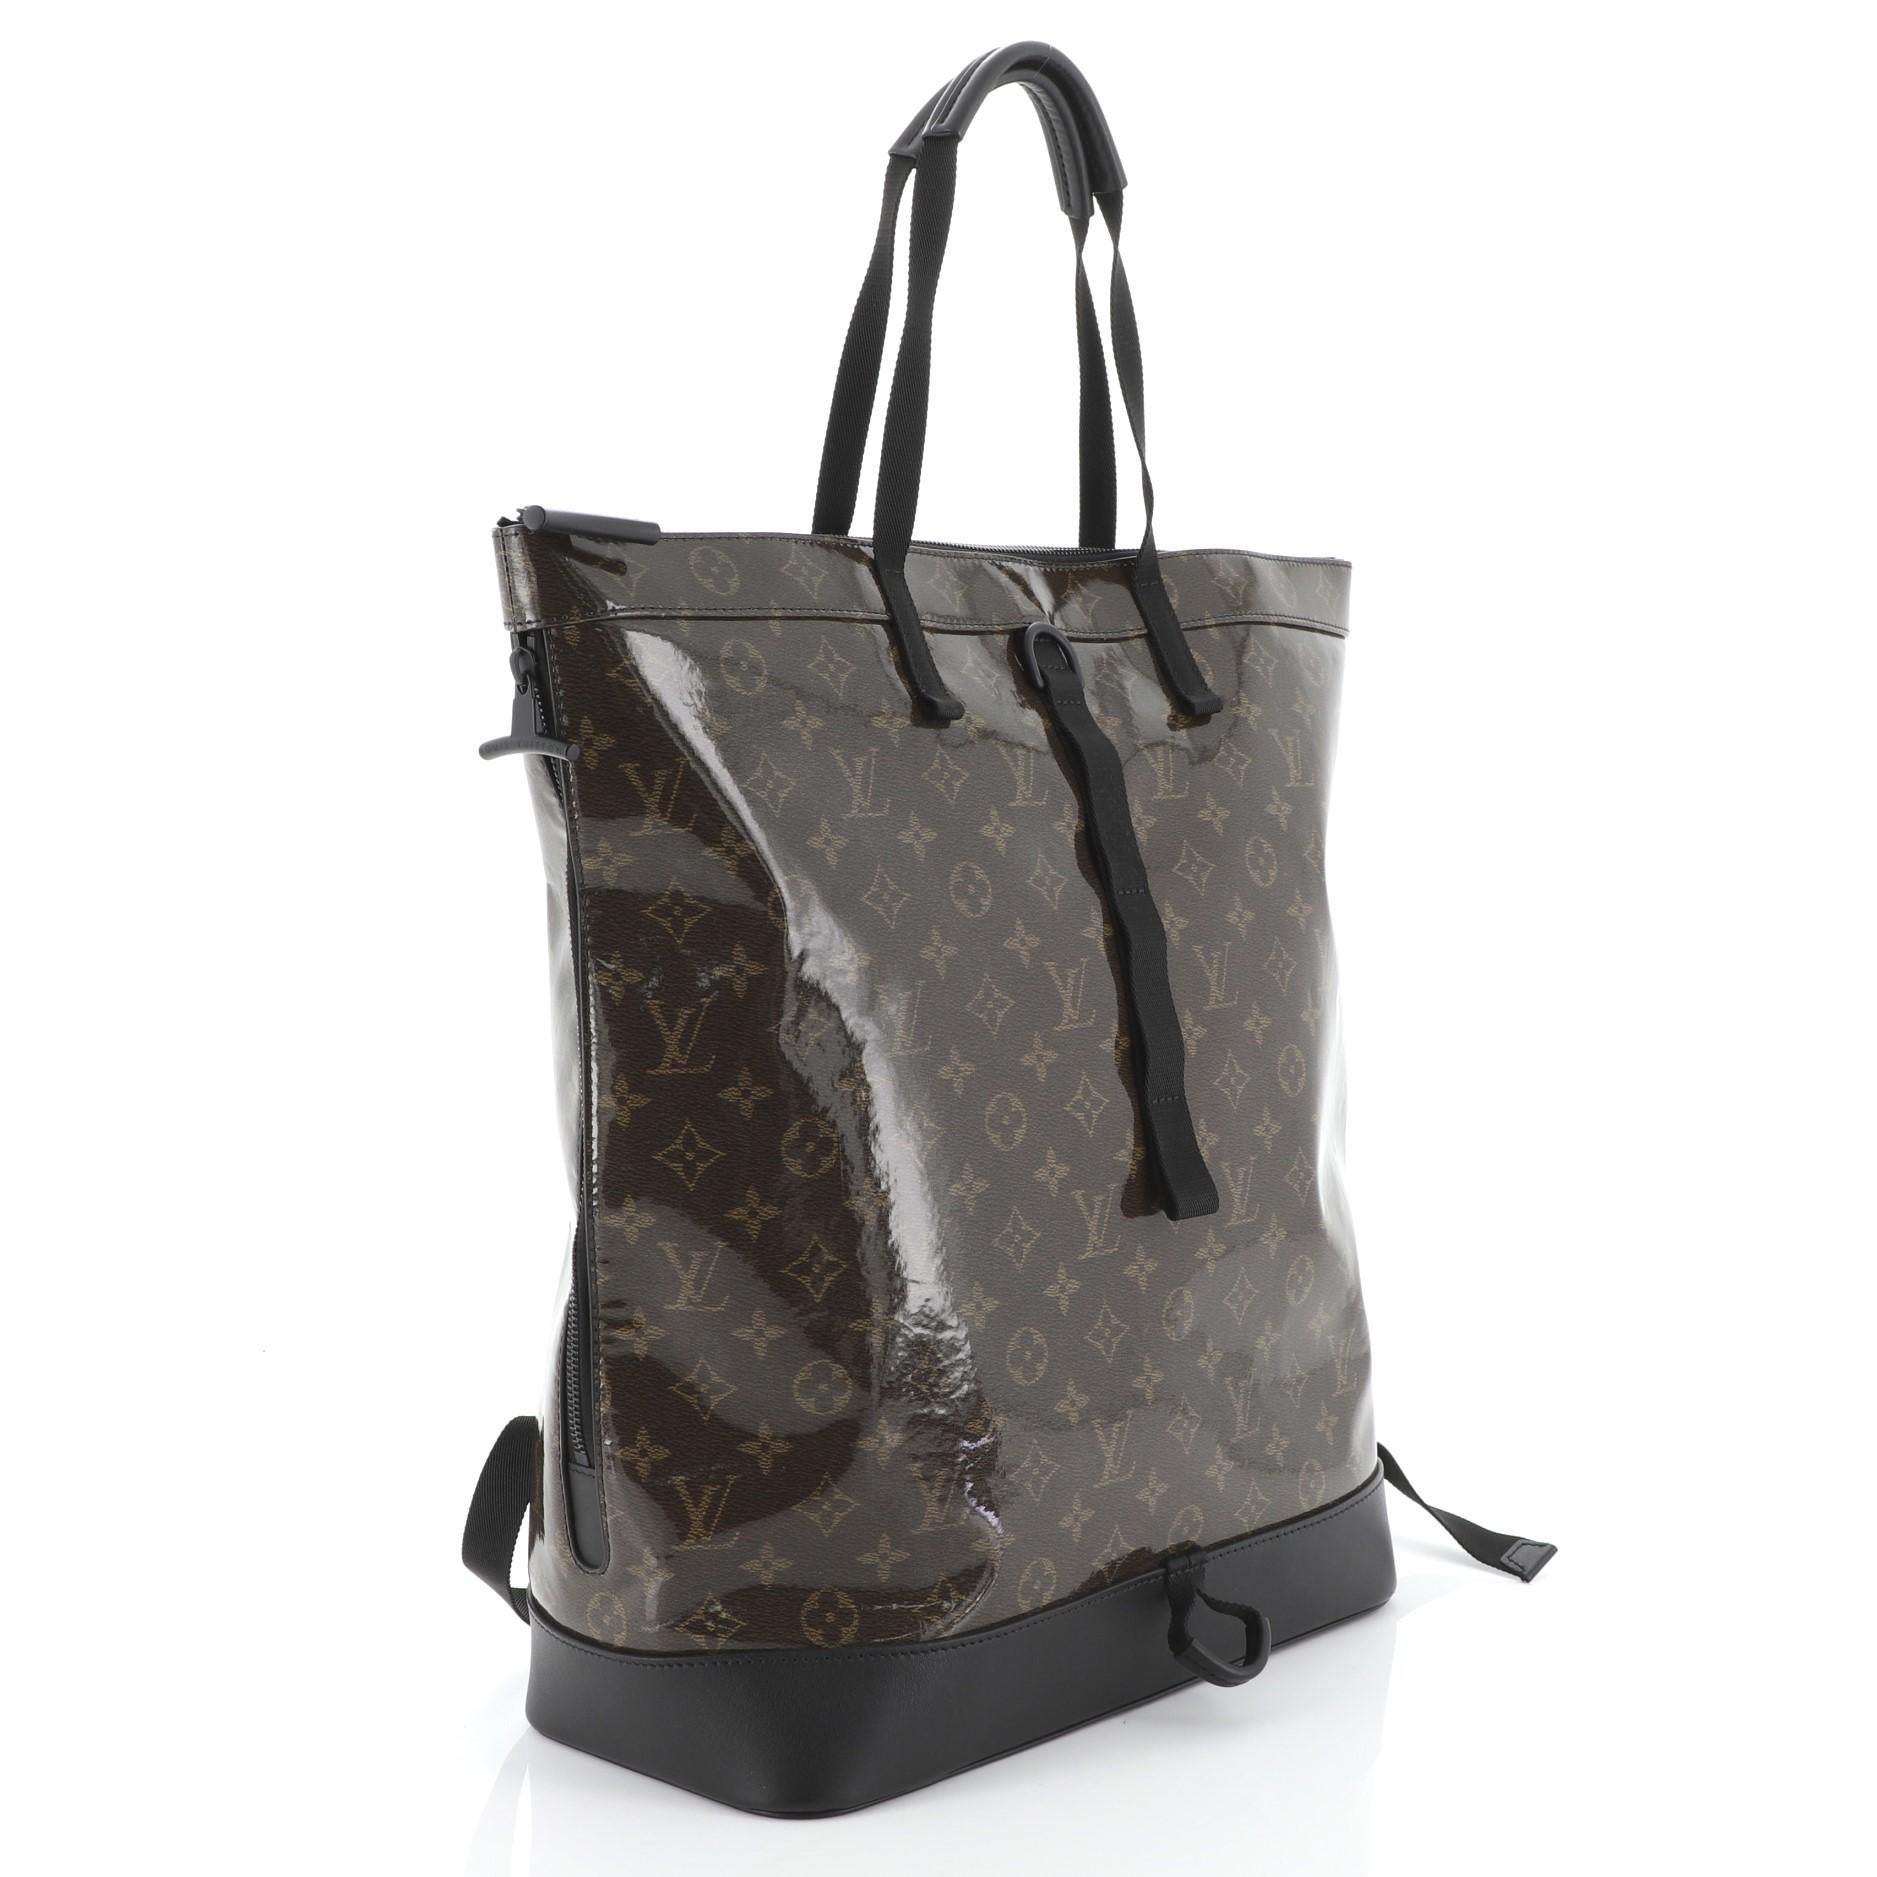 This Louis Vuitton Zipped Tote Limited Edition Monogram Glaze Eclipse Canvas, crafted from brown monogram glaze eclipse canvas, features dual top handles, adjustable backpack straps, exterior side zip pocket, and black-tone hardware. Its zip closure